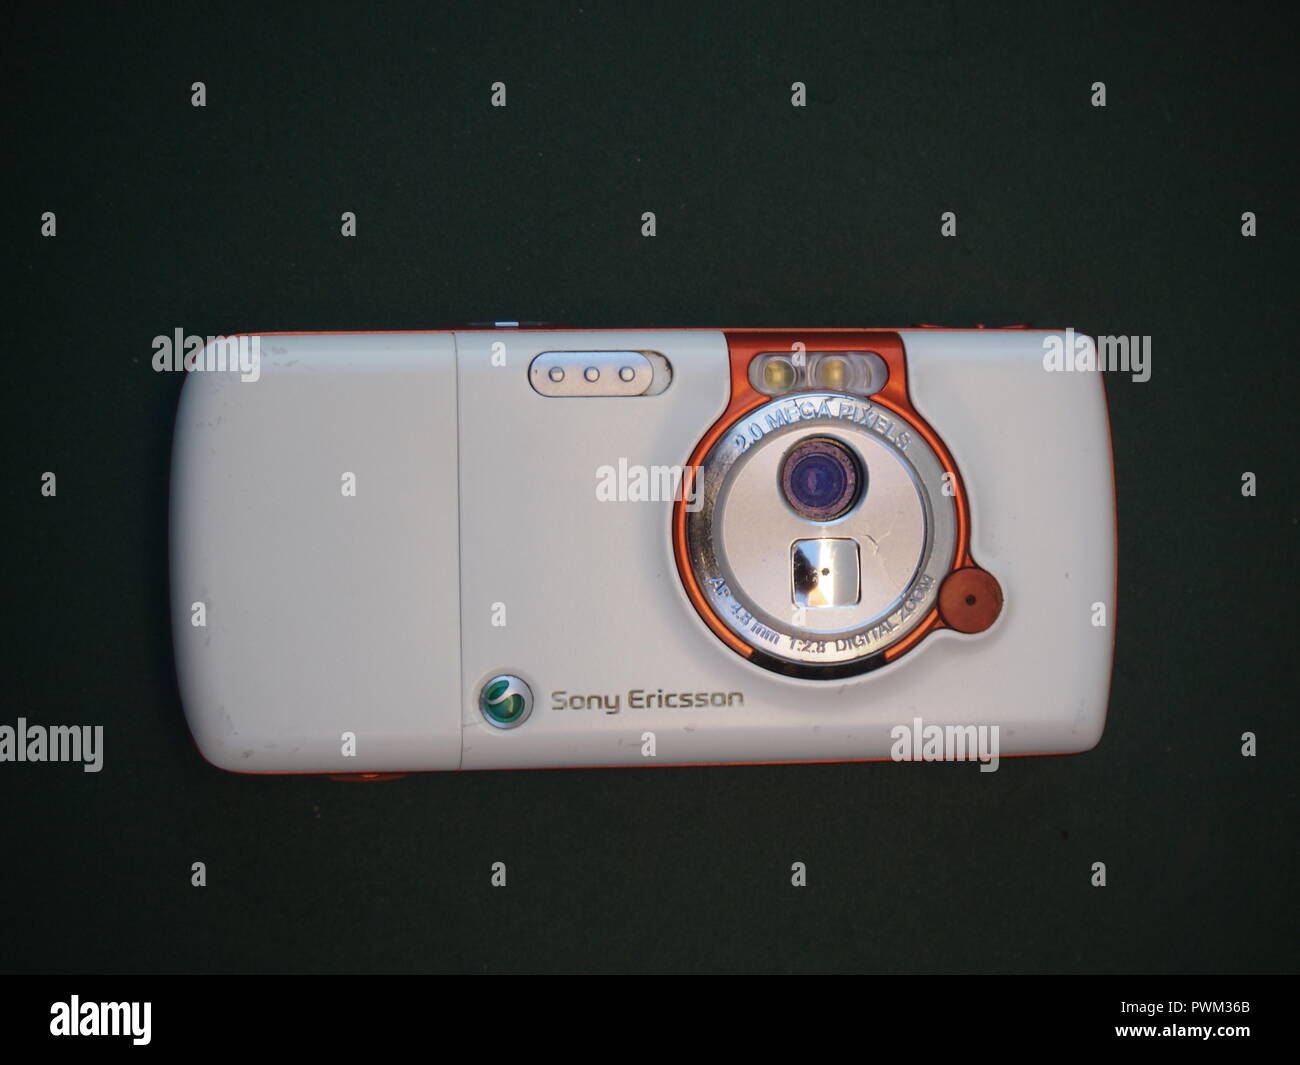 Sony Ericsson W888 pictures, official photos